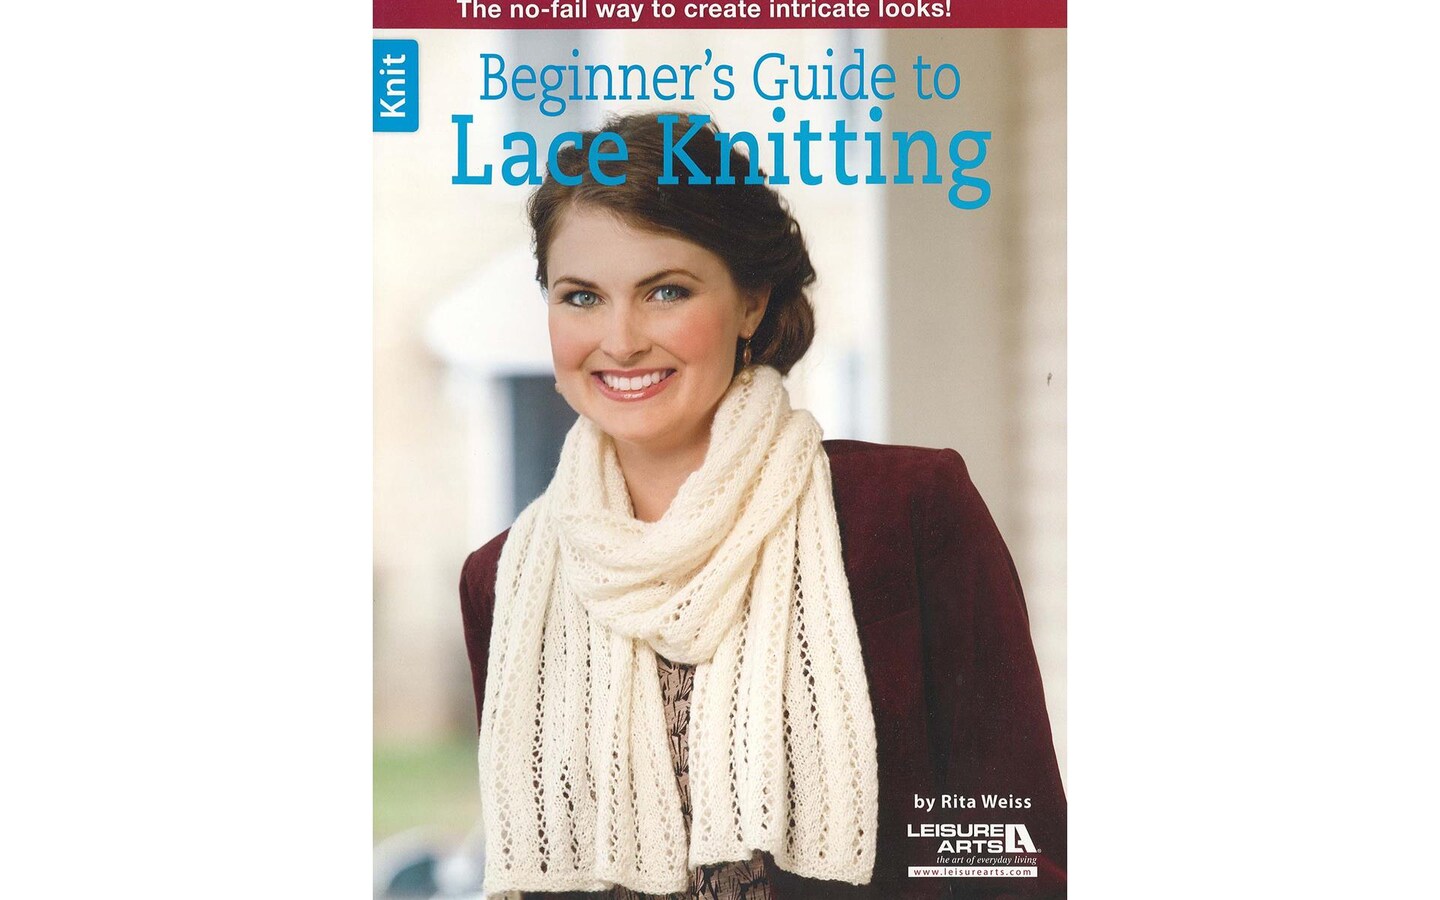 Leisure Arts Beginner's Guide to Lace Knitting Book